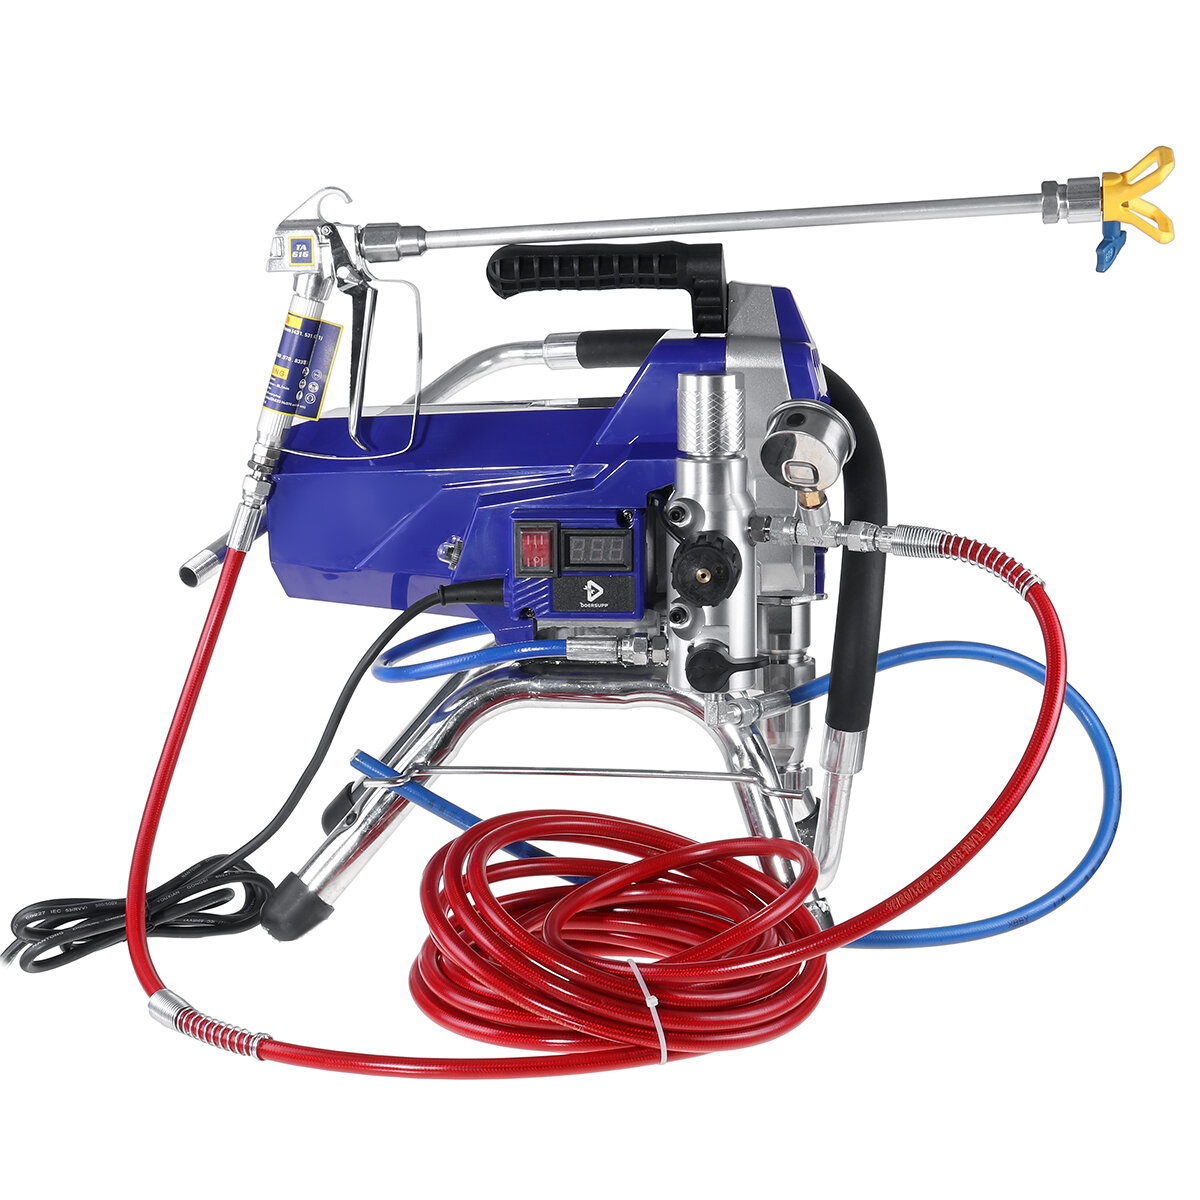 2500W 3500PSI 110V/220V Airless Sprayer Machine Spraying Tool Oil Painting With Pressure Gauge